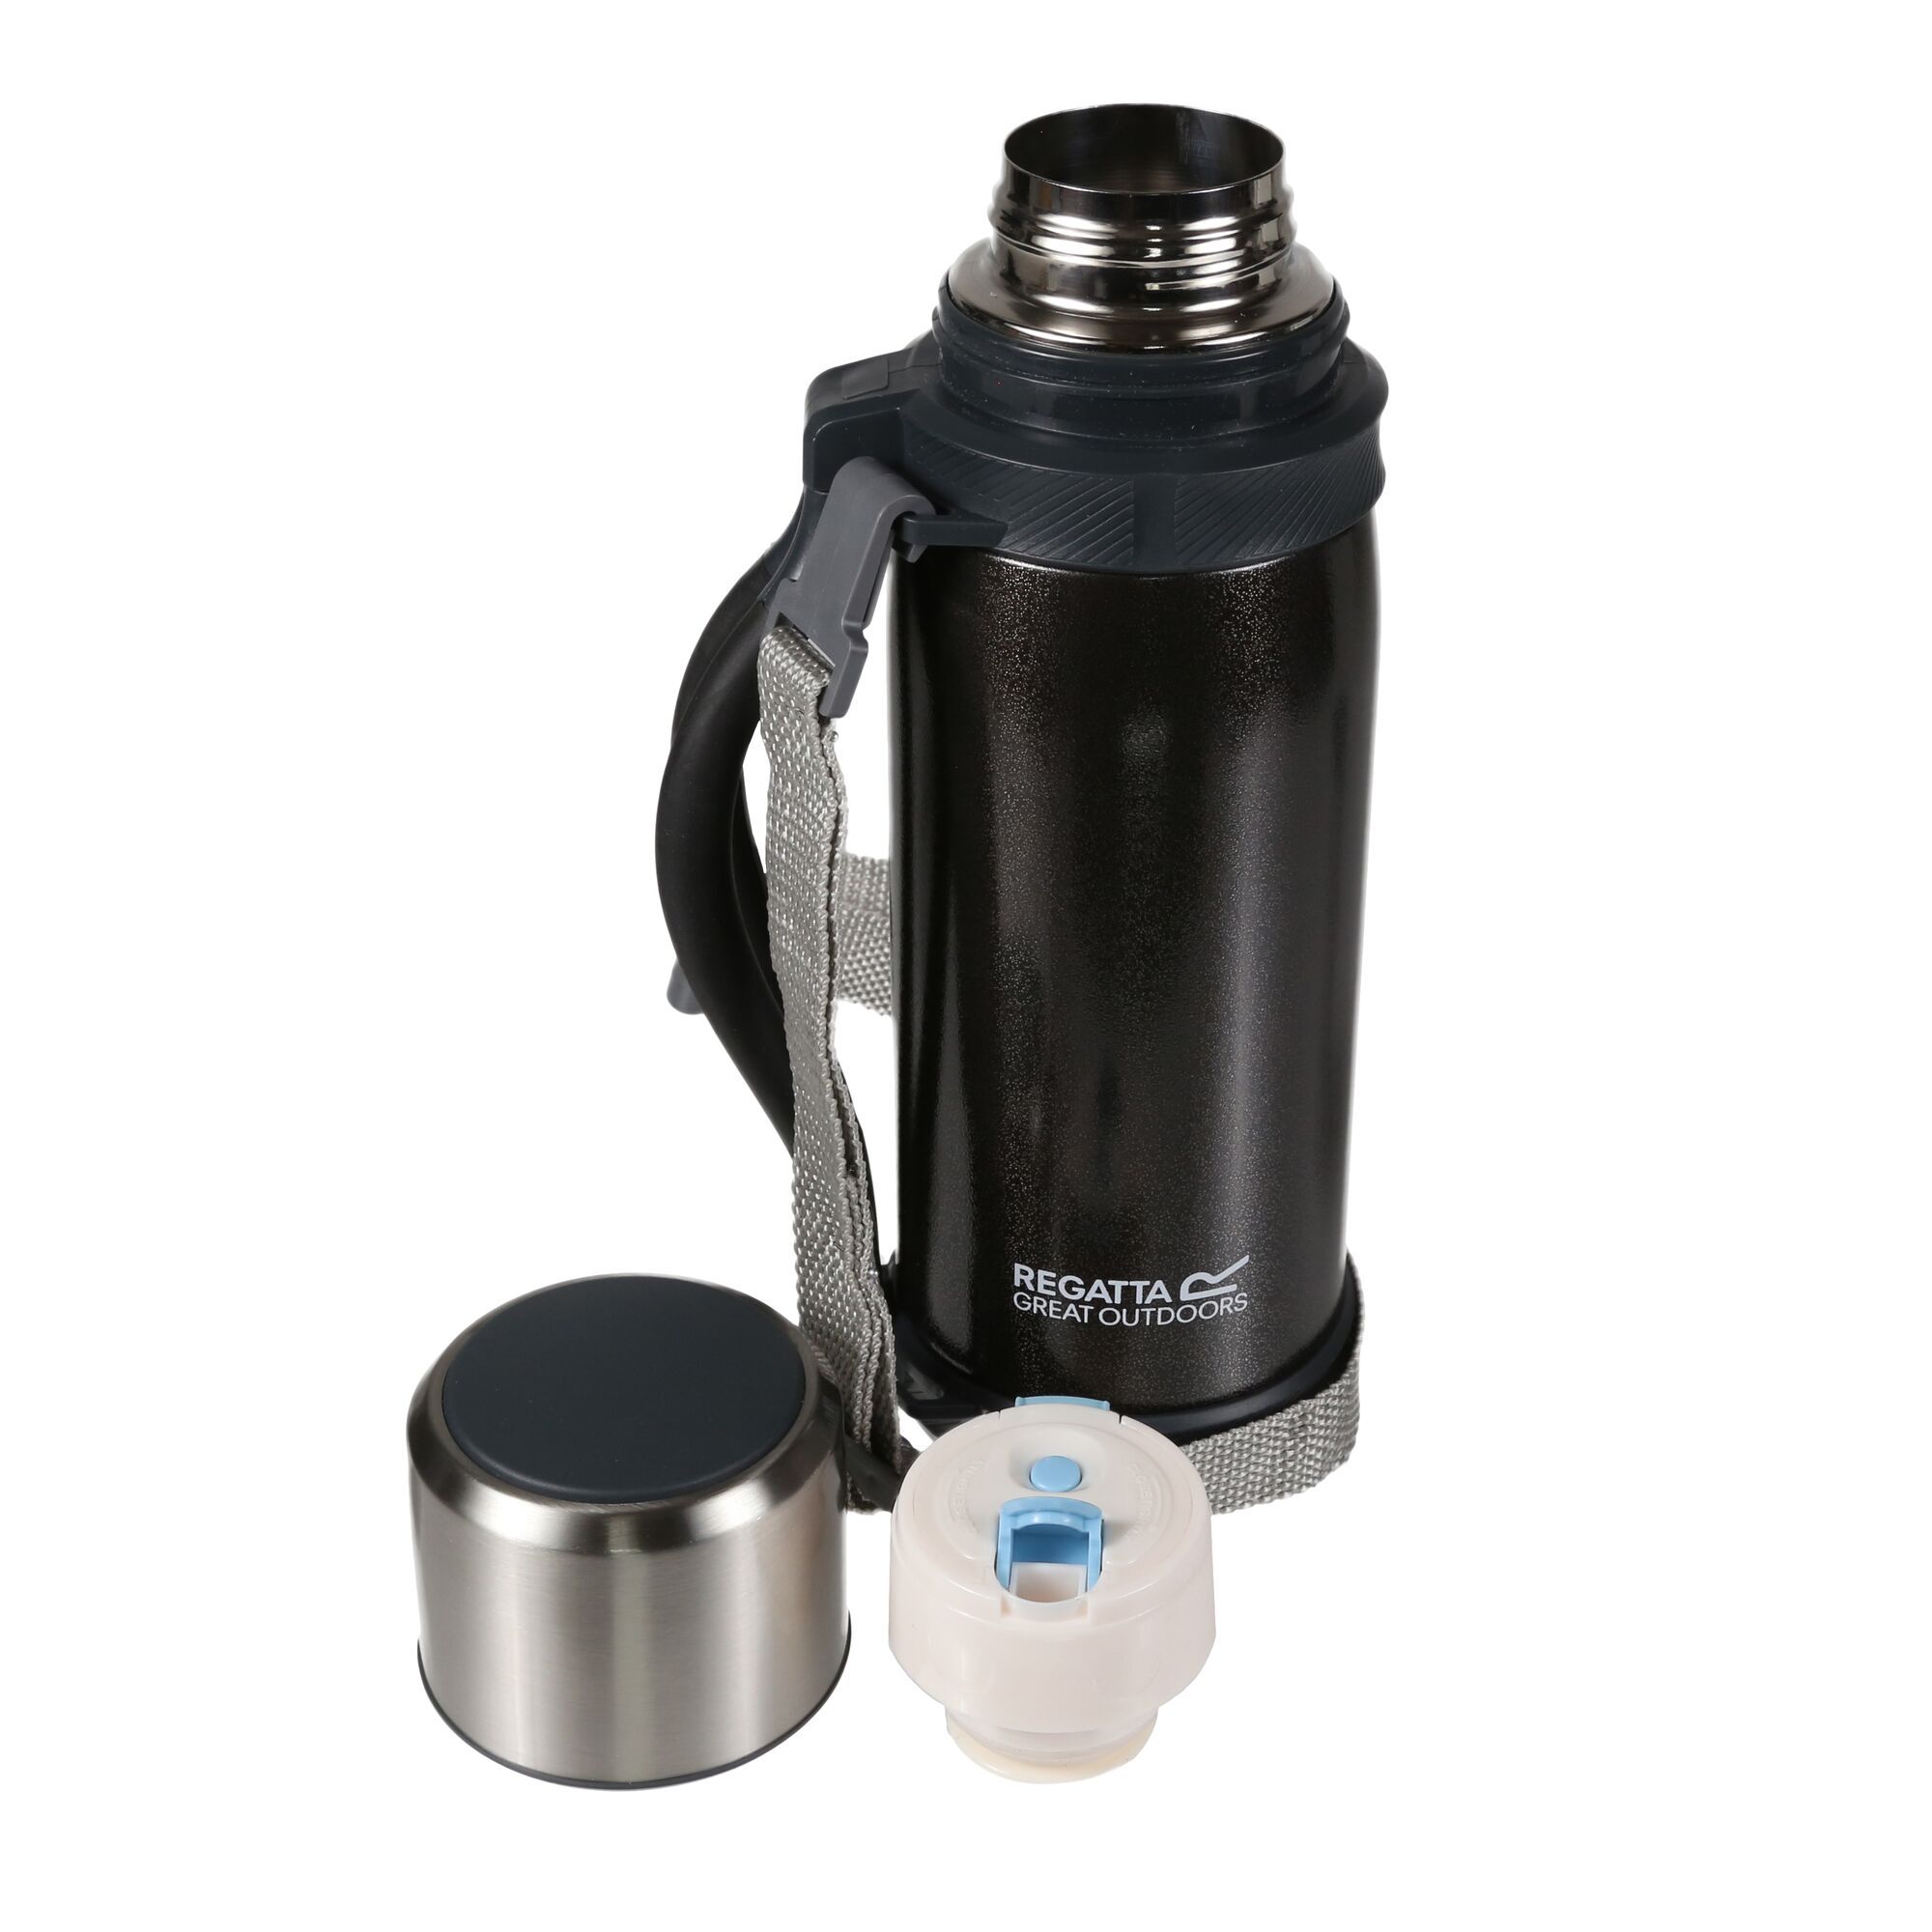 Material: Stainless steel and polypropylene. Drinks flask. Double walled for excellent heat retention. Push button release for easy pouring. Leak-proof lid, can be used as a cup. Ergonomic folding handle. Capacity: 1.2 litres.